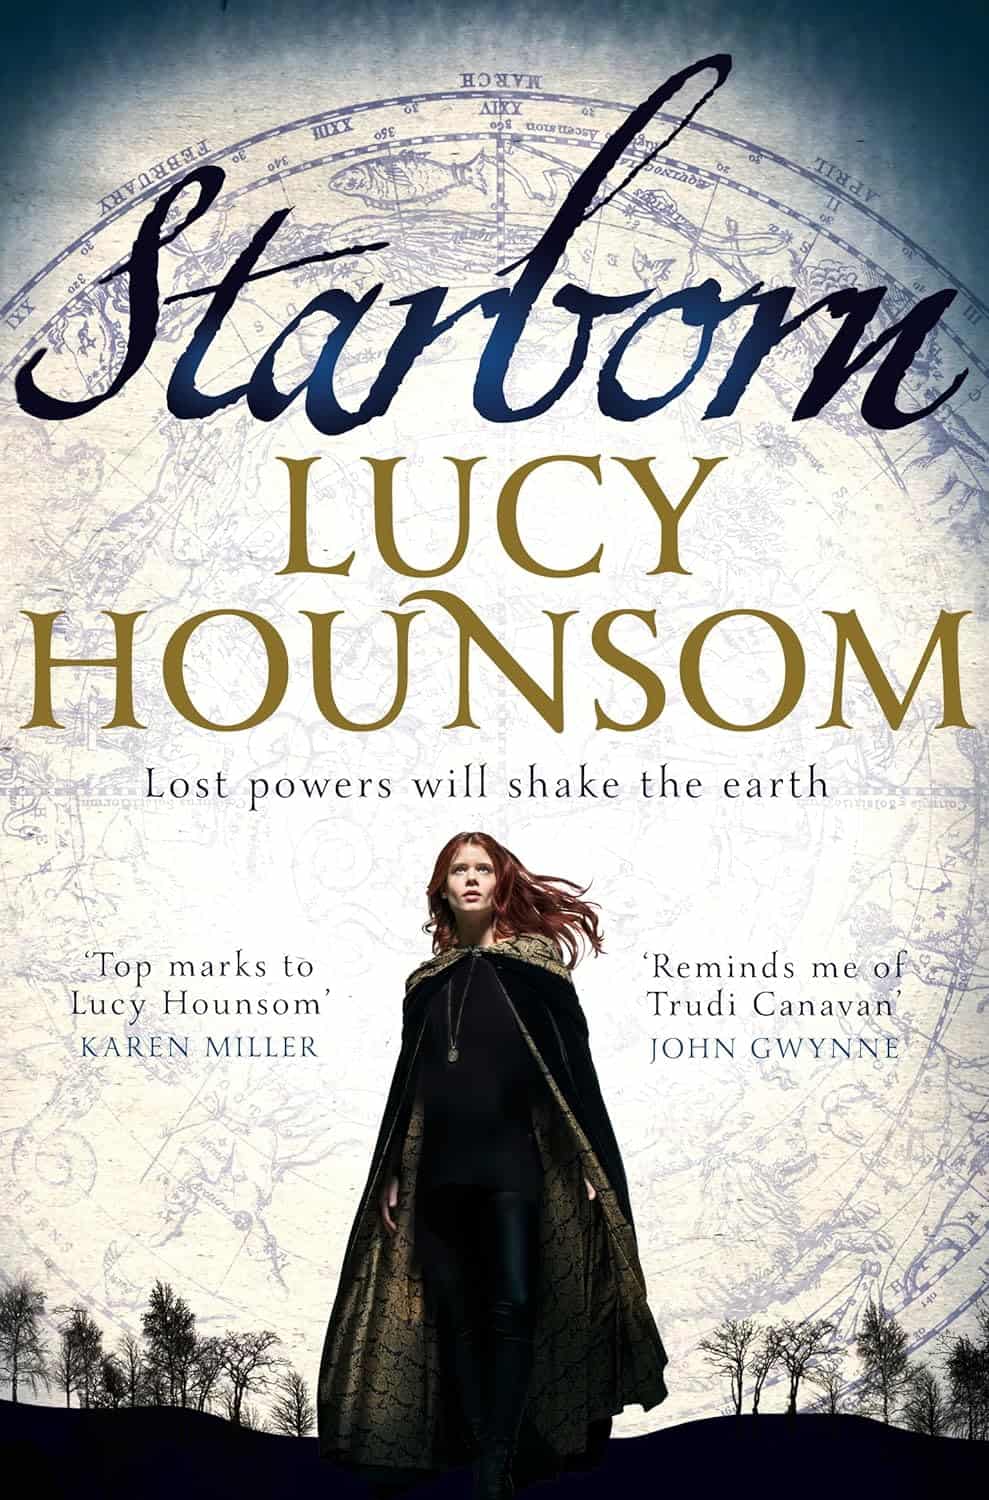 The Worldmaker Trilogy by Lucy Hounsom